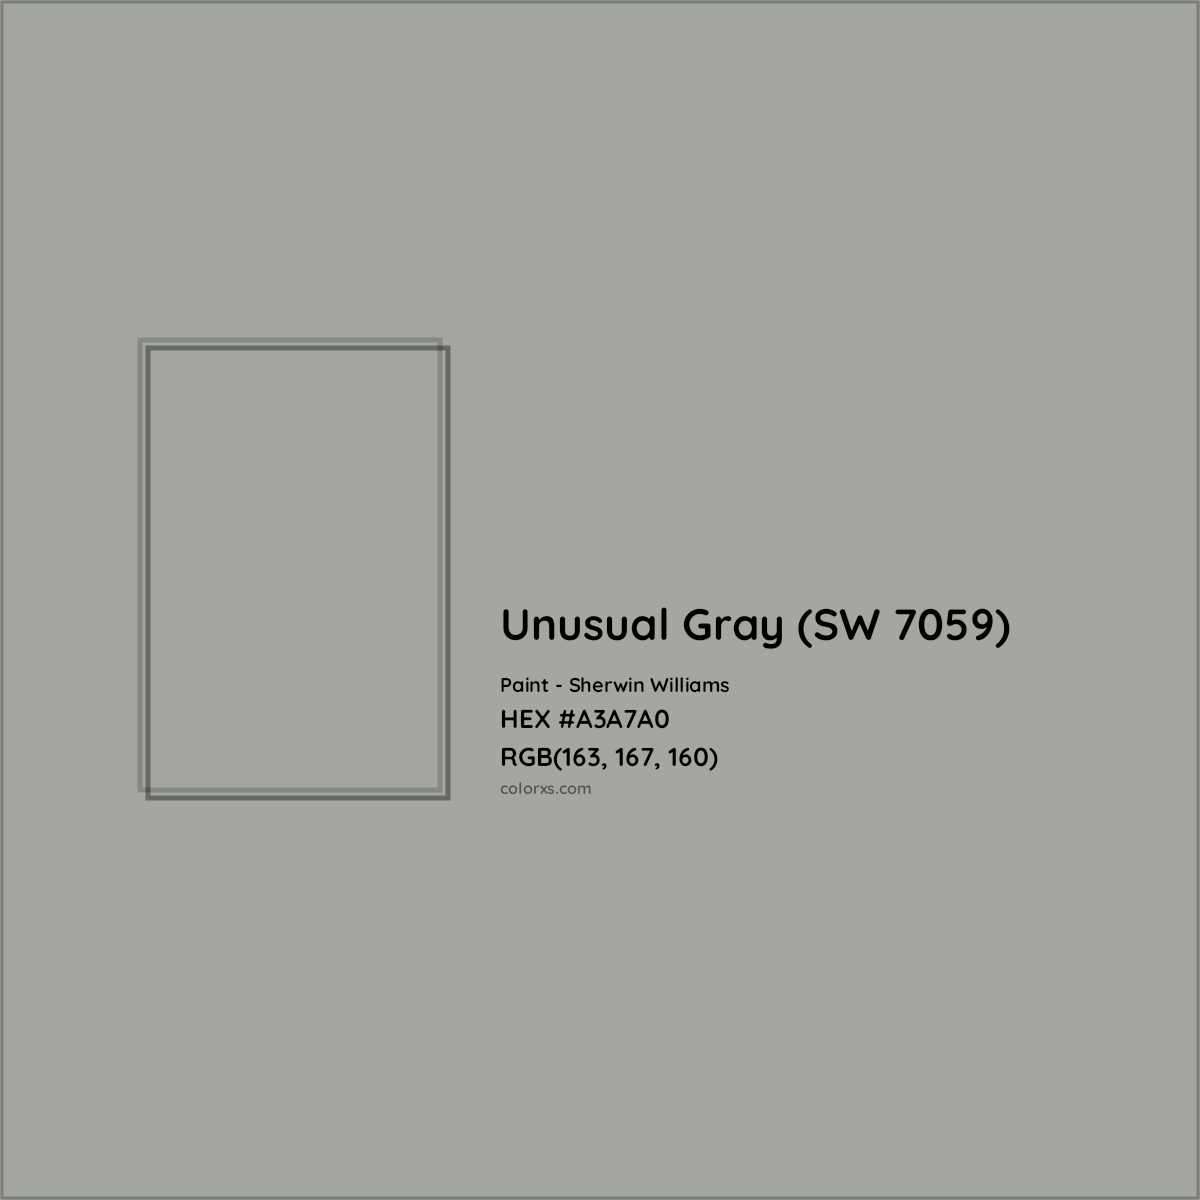 HEX #A3A7A0 Unusual Gray (SW 7059) Paint Sherwin Williams - Color Code